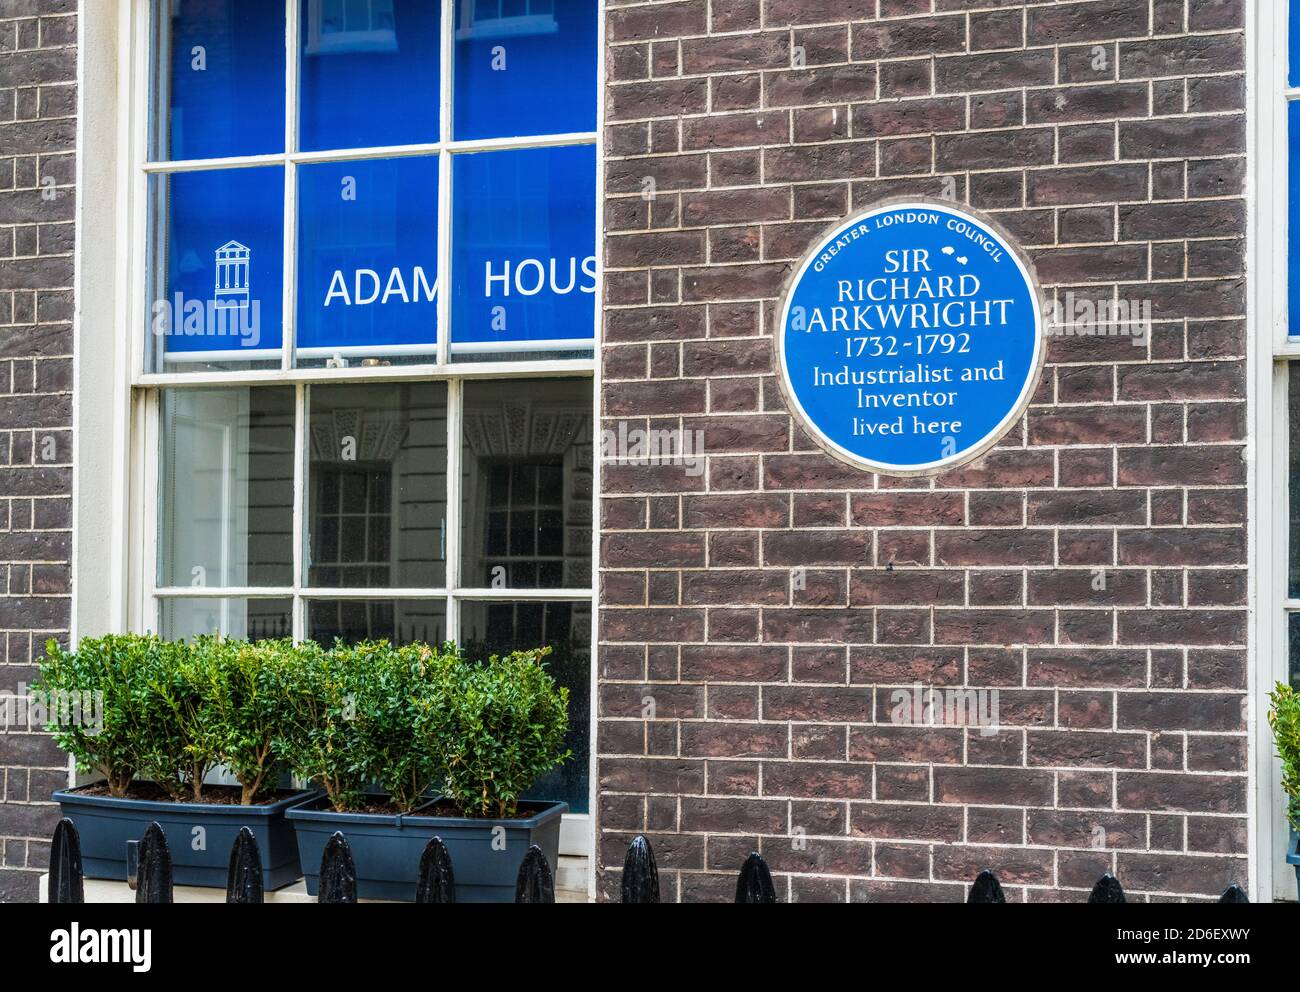 Sir Richard Arkwright Blue Plaque - SIR RICHARD ARKWRIGHT 1732-1792 Industrialist and Inventor lived here - 8 Adam Street Charing Cross London. Stock Photo